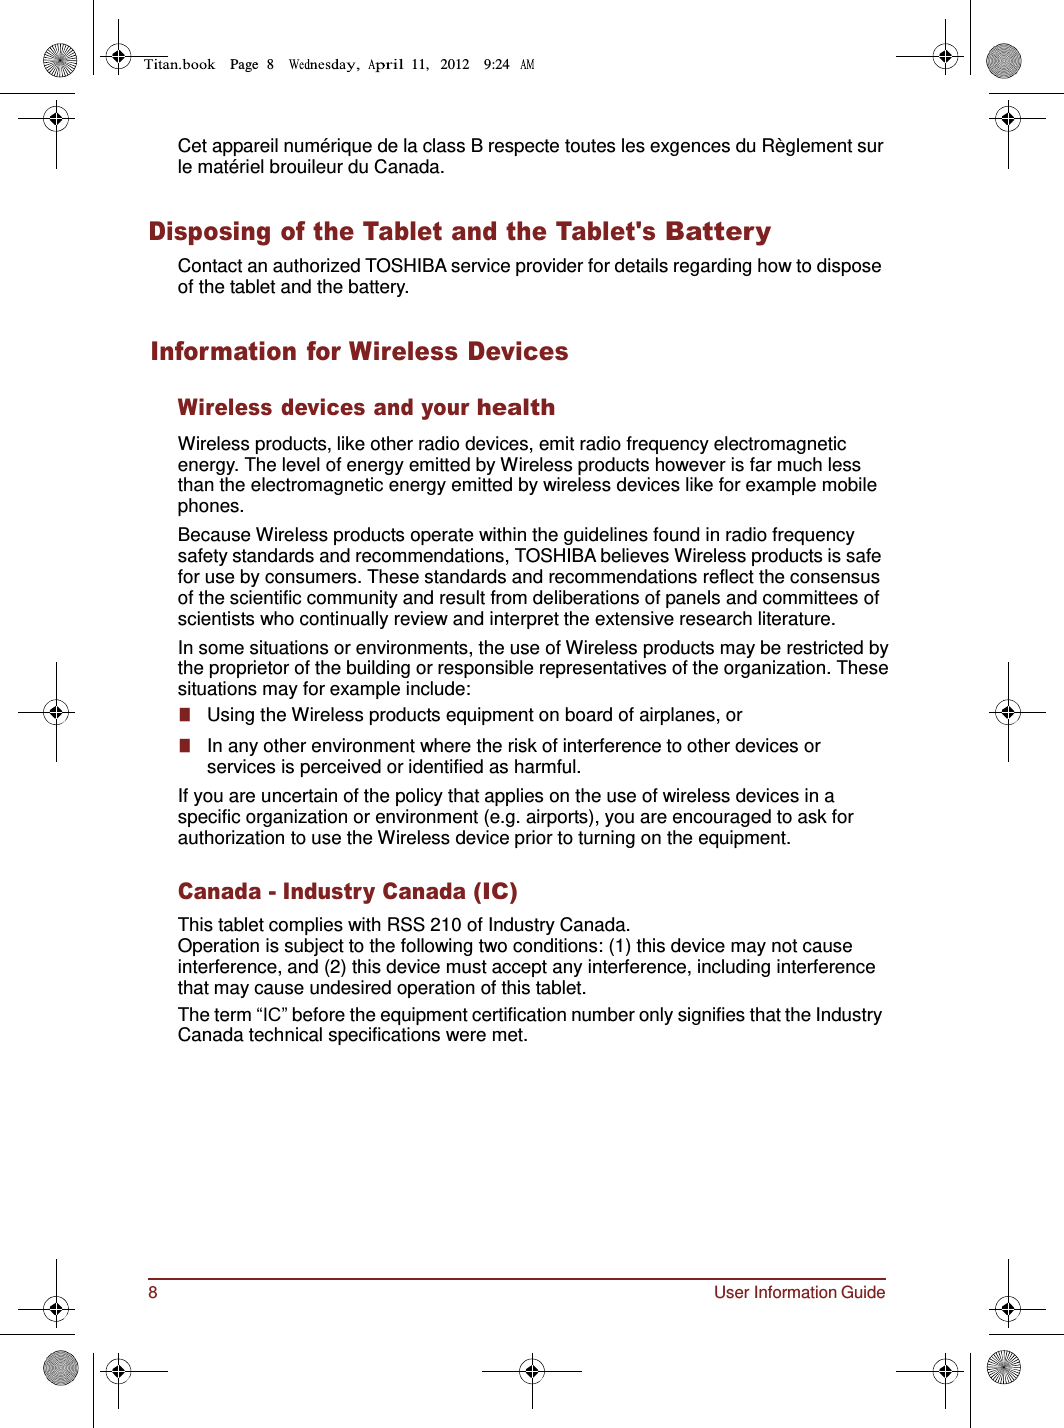 8 User Information Guide Page  8        11,   2012    9:24      Cet appareil numérique de la class B respecte toutes les exgences du Règlement sur le matériel brouileur du Canada.   Disposing of the Tablet and the Tablet&apos;s Battery Contact an authorized TOSHIBA service provider for details regarding how to dispose of the tablet and the battery.   Information for Wireless Devices  Wireless devices and your health  Wireless products, like other radio devices, emit radio frequency electromagnetic energy. The level of energy emitted by Wireless products however is far much less than the electromagnetic energy emitted by wireless devices like for example mobile phones. Because Wireless products operate within the guidelines found in radio frequency safety standards and recommendations, TOSHIBA believes Wireless products is safe for use by consumers. These standards and recommendations reflect the consensus of the scientific community and result from deliberations of panels and committees of scientists who continually review and interpret the extensive research literature. In some situations or environments, the use of Wireless products may be restricted by the proprietor of the building or responsible representatives of the organization. These situations may for example include: ■   Using the Wireless products equipment on board of airplanes, or ■   In any other environment where the risk of interference to other devices or services is perceived or identified as harmful. If you are uncertain of the policy that applies on the use of wireless devices in a specific organization or environment (e.g. airports), you are encouraged to ask for authorization to use the Wireless device prior to turning on the equipment.  Canada - Industry Canada (IC) This tablet complies with RSS 210 of Industry Canada. Operation is subject to the following two conditions: (1) this device may not cause interference, and (2) this device must accept any interference, including interference that may cause undesired operation of this tablet. The term “IC” before the equipment certification number only signifies that the Industry Canada technical specifications were met. 